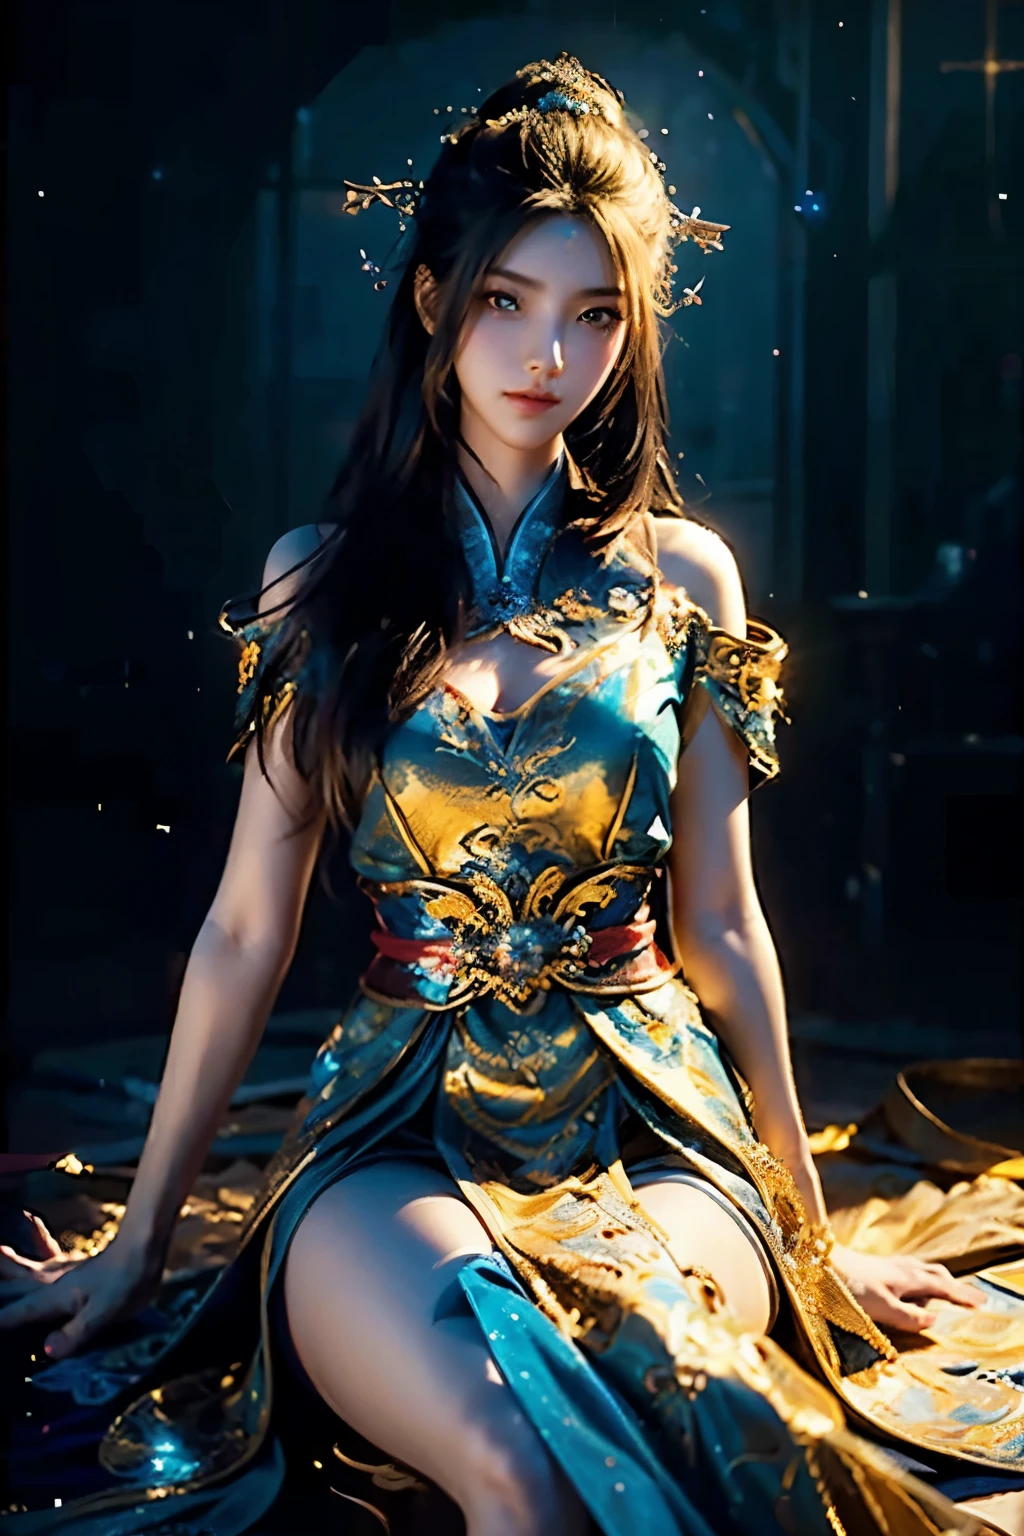 (k, masterpiece:1.21), (best quality:1.21), (an extremely delicate and beautiful), ((Hasselblad photography)), (realistic, photo-realistic:1.3),(UHD), high res,HDR, cinematic lighting, highly detailed, highly detailed background, woman, long hair, sunlight, gigantic breasts, iridescent dress, glowing stars, A digital illustration, glowing lotus, defraction spikes, chromatic aberration, bloom AND (glowing, holofoil:0.9), a beautiful fantasy empress, guweiz, ruan jia and artgerm, beautiful fantasy maiden, japanese goddess, 